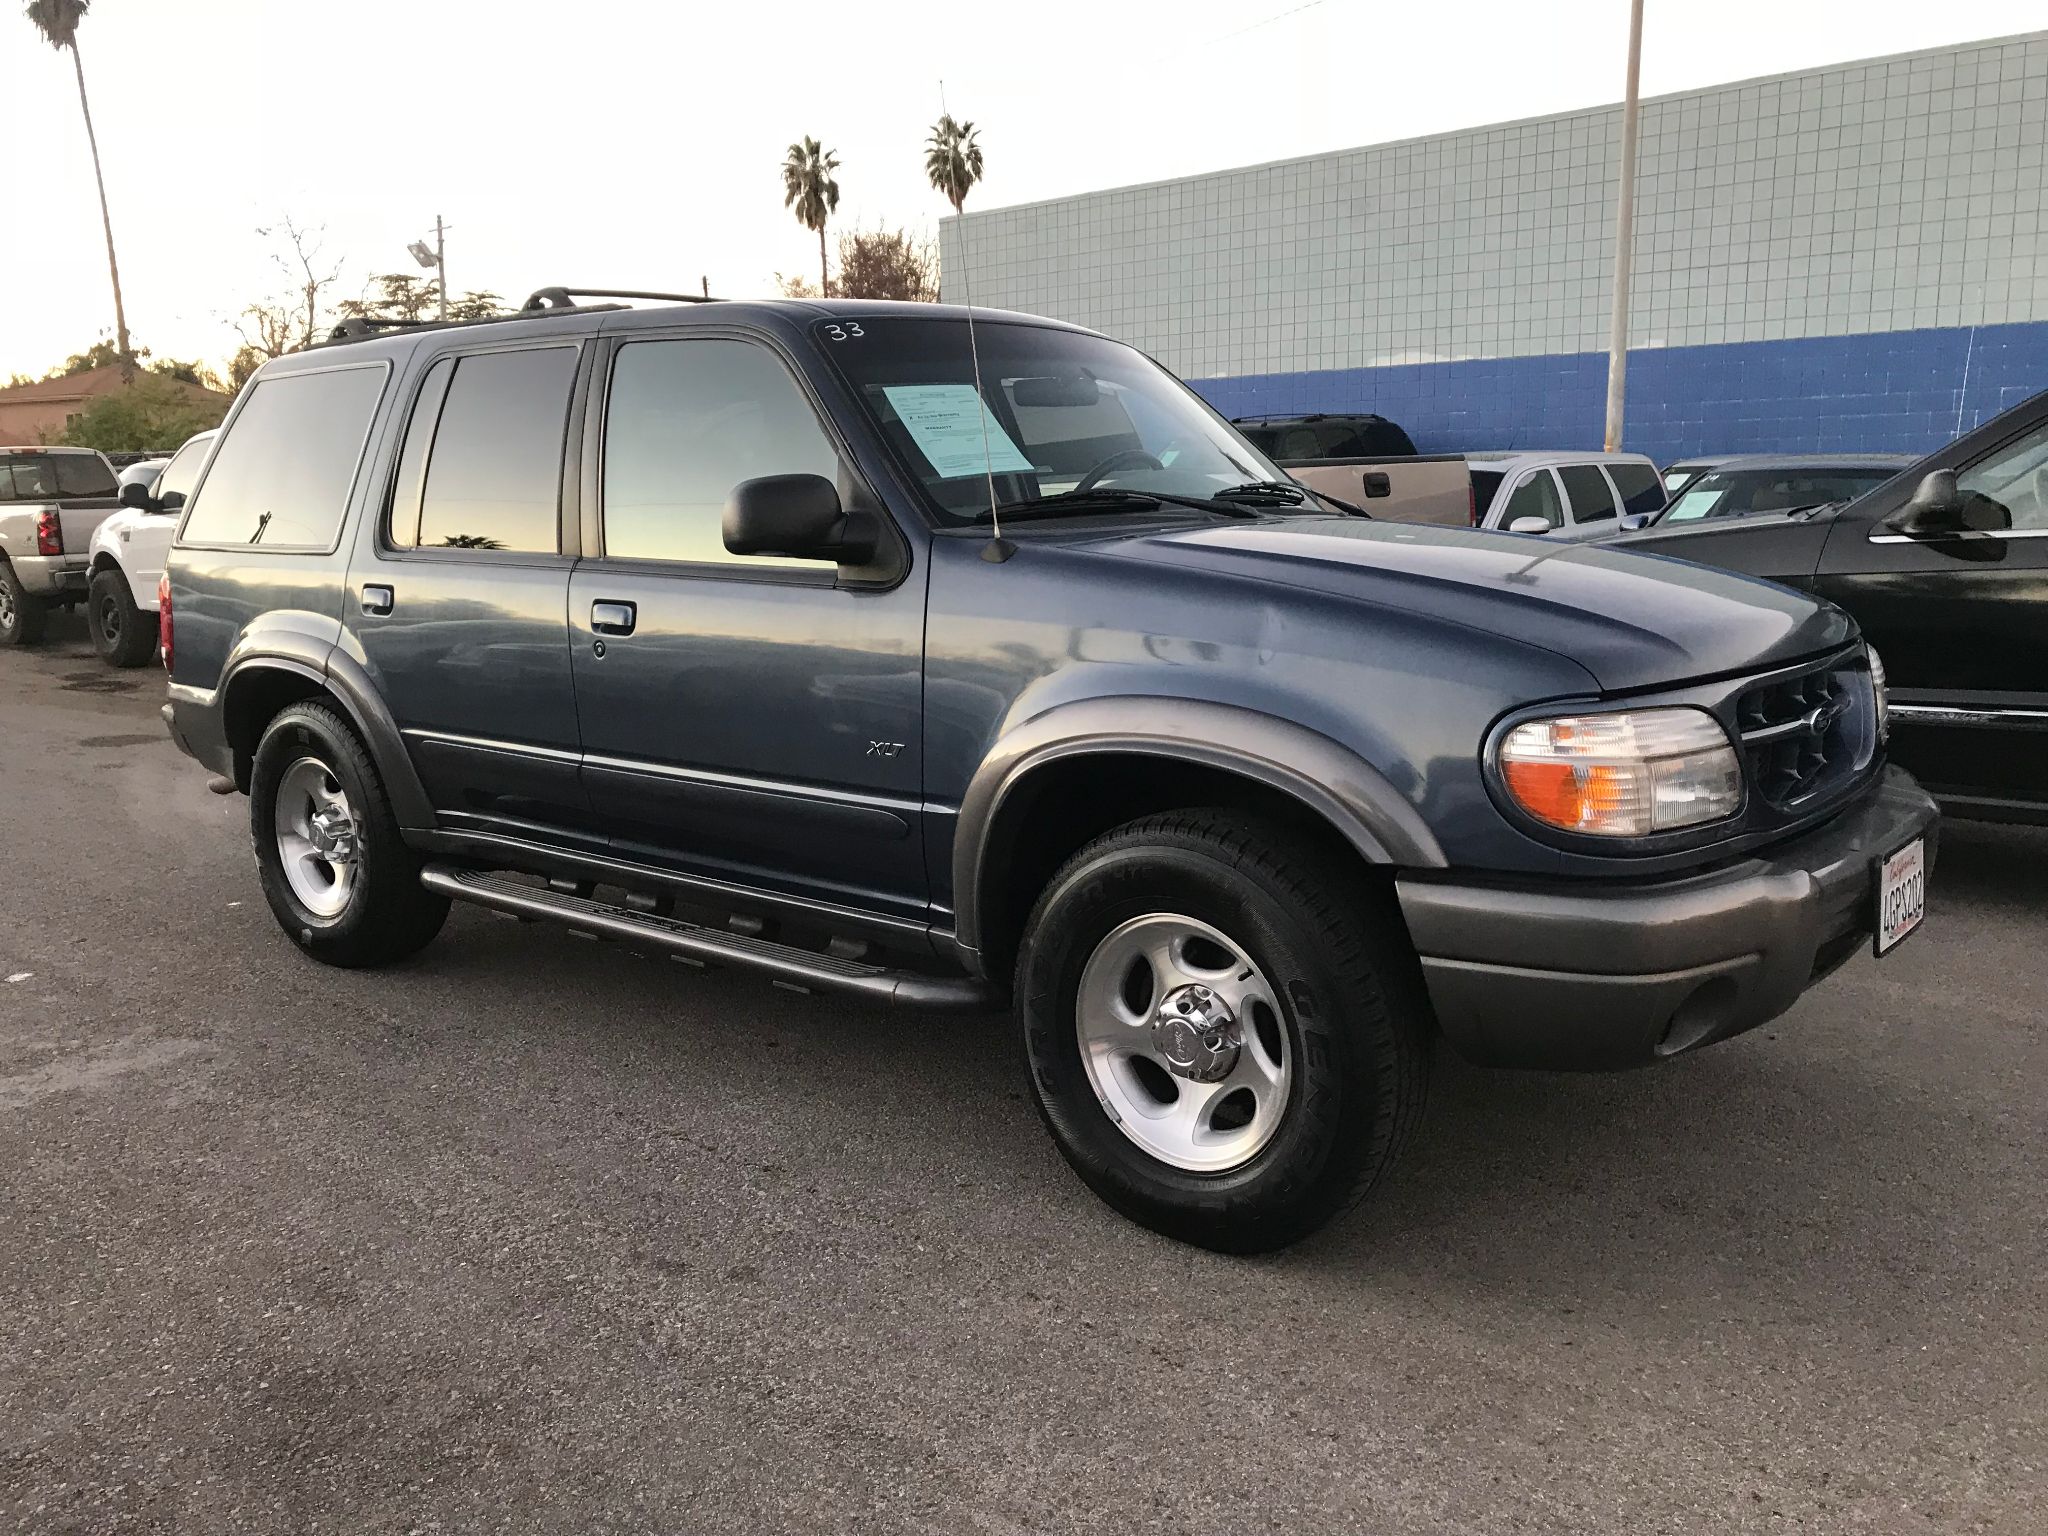 Used 1999 Ford Explorer XLT at City Cars Warehouse INC